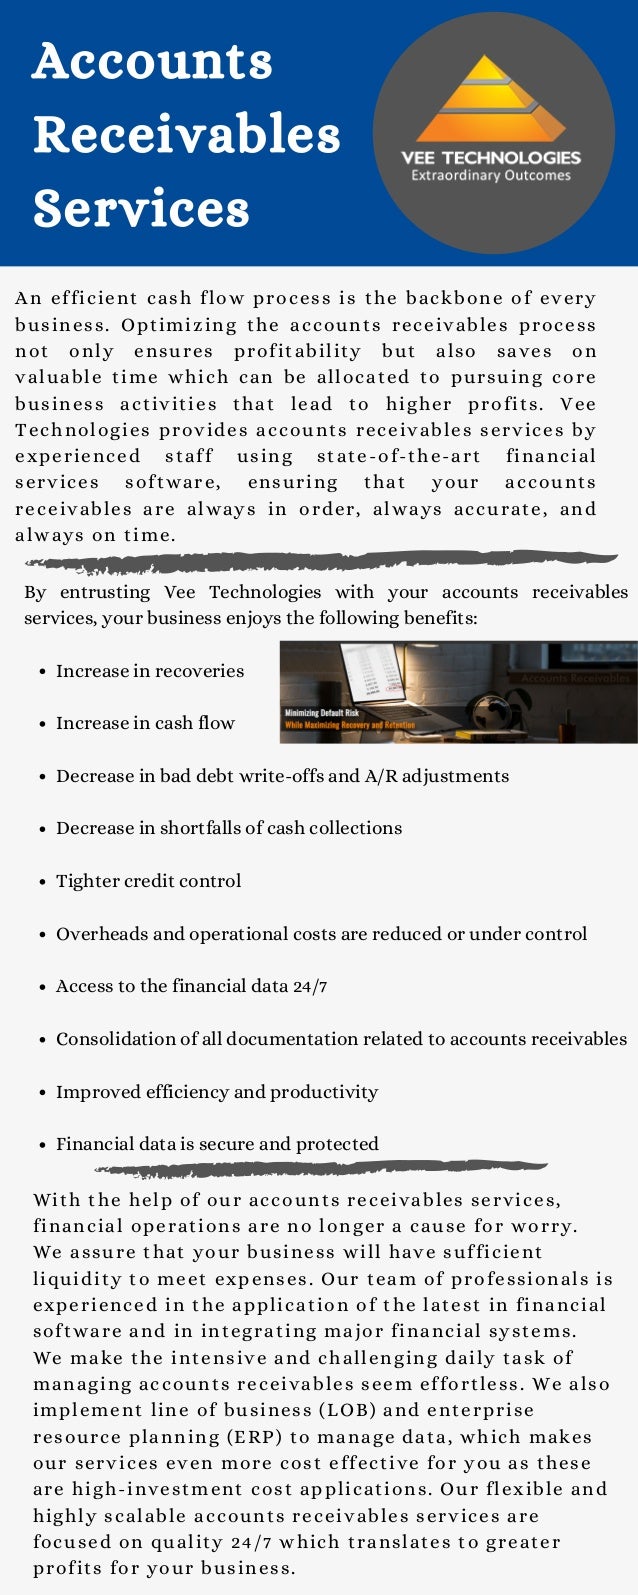 Increase in recoveries
Increase in cash flow
Decrease in bad debt write-offs and A/R adjustments
Decrease in shortfalls of cash collections
Tighter credit control
Overheads and operational costs are reduced or under control
Access to the financial data 24/7
Consolidation of all documentation related to accounts receivables
Improved efficiency and productivity
Financial data is secure and protected
By entrusting Vee Technologies with your accounts receivables
services, your business enjoys the following benefits:
Accounts
Receivables
Services
An efficient cash flow process is the backbone of every
business. Optimizing the accounts receivables process
not only ensures profitability but also saves on
valuable time which can be allocated to pursuing core
business activities that lead to higher profits. Vee
Technologies provides accounts receivables services by
experienced staff using state-of-the-art financial
services software, ensuring that your accounts
receivables are always in order, always accurate, and
always on time.
With the help of our accounts receivables services,
financial operations are no longer a cause for worry.
We assure that your business will have sufficient
liquidity to meet expenses. Our team of professionals is
experienced in the application of the latest in financial
software and in integrating major financial systems.
We make the intensive and challenging daily task of
managing accounts receivables seem effortless. We also
implement line of business (LOB) and enterprise
resource planning (ERP) to manage data, which makes
our services even more cost effective for you as these
are high-investment cost applications. Our flexible and
highly scalable accounts receivables services are
focused on quality 24/7 which translates to greater
profits for your business.
 